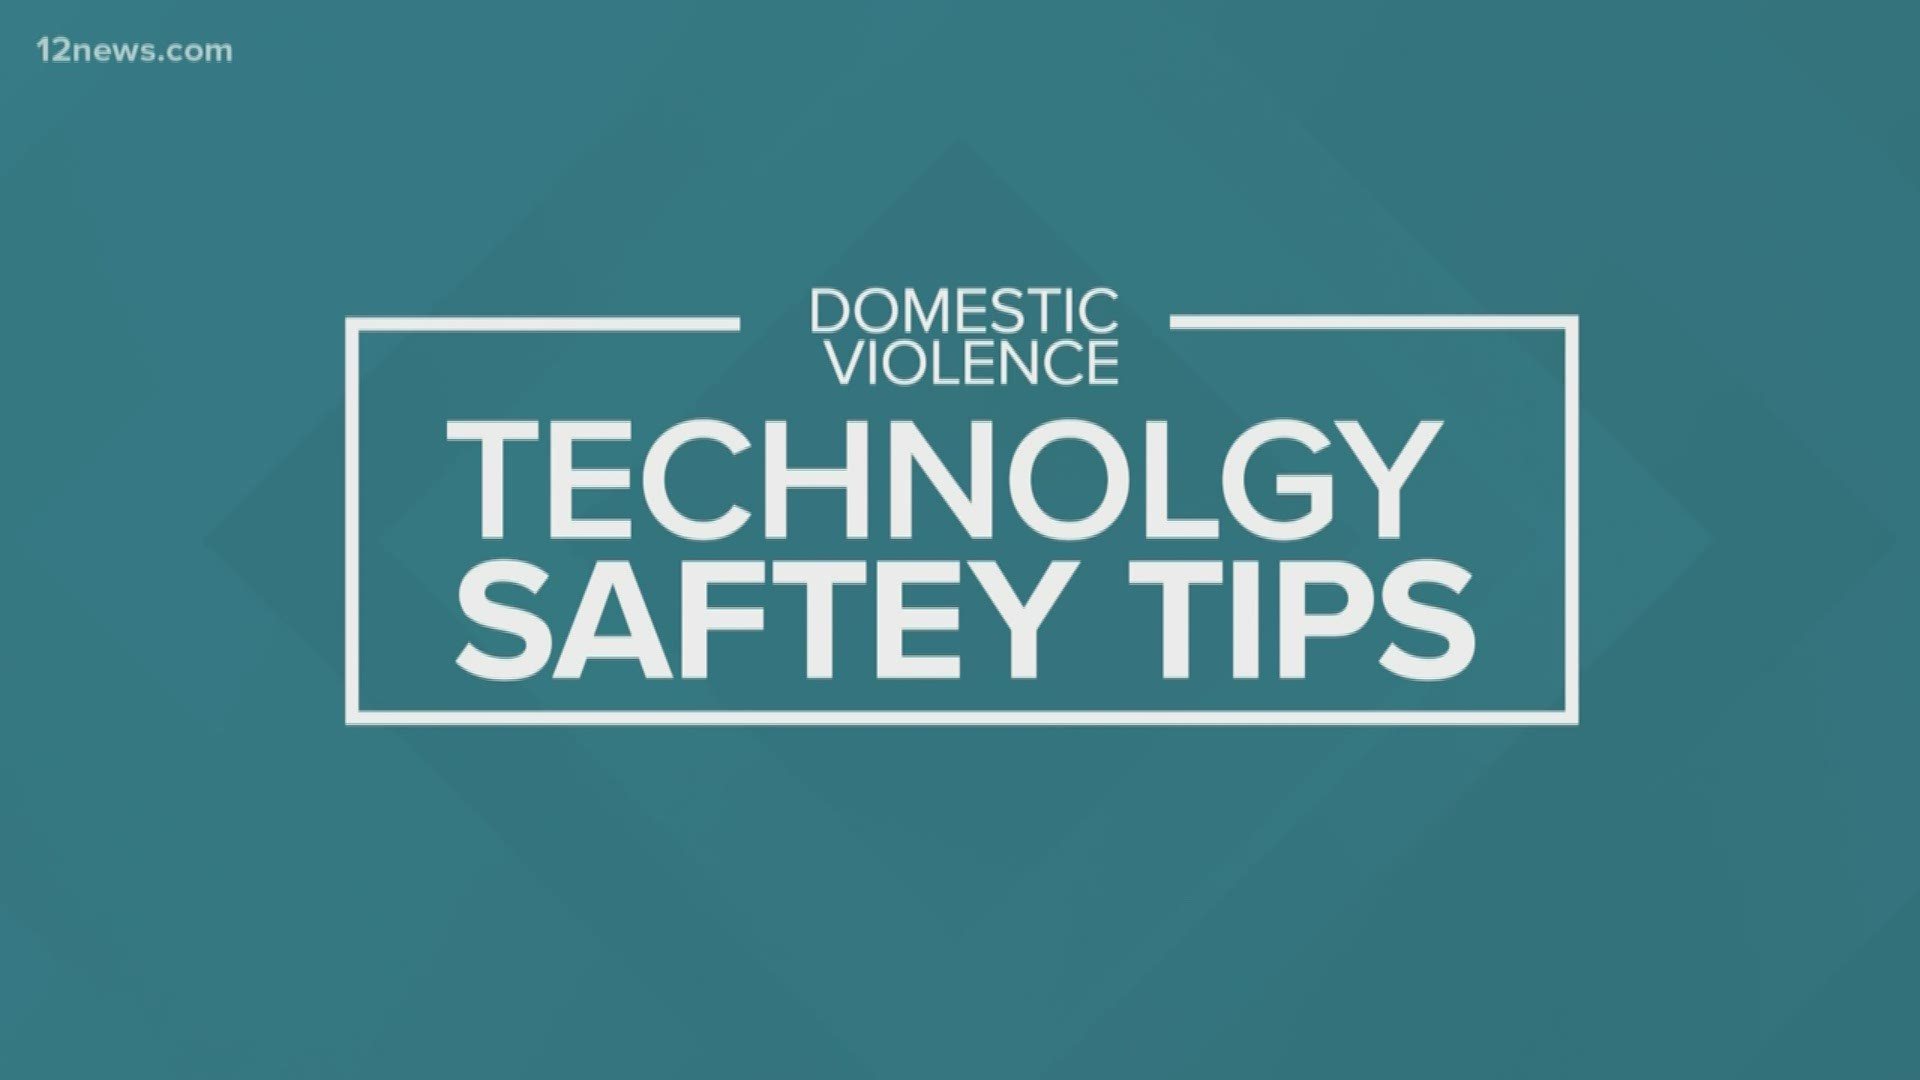 Here are some technology safety tips for people in domestic violence situations. Destry Jetton has more.